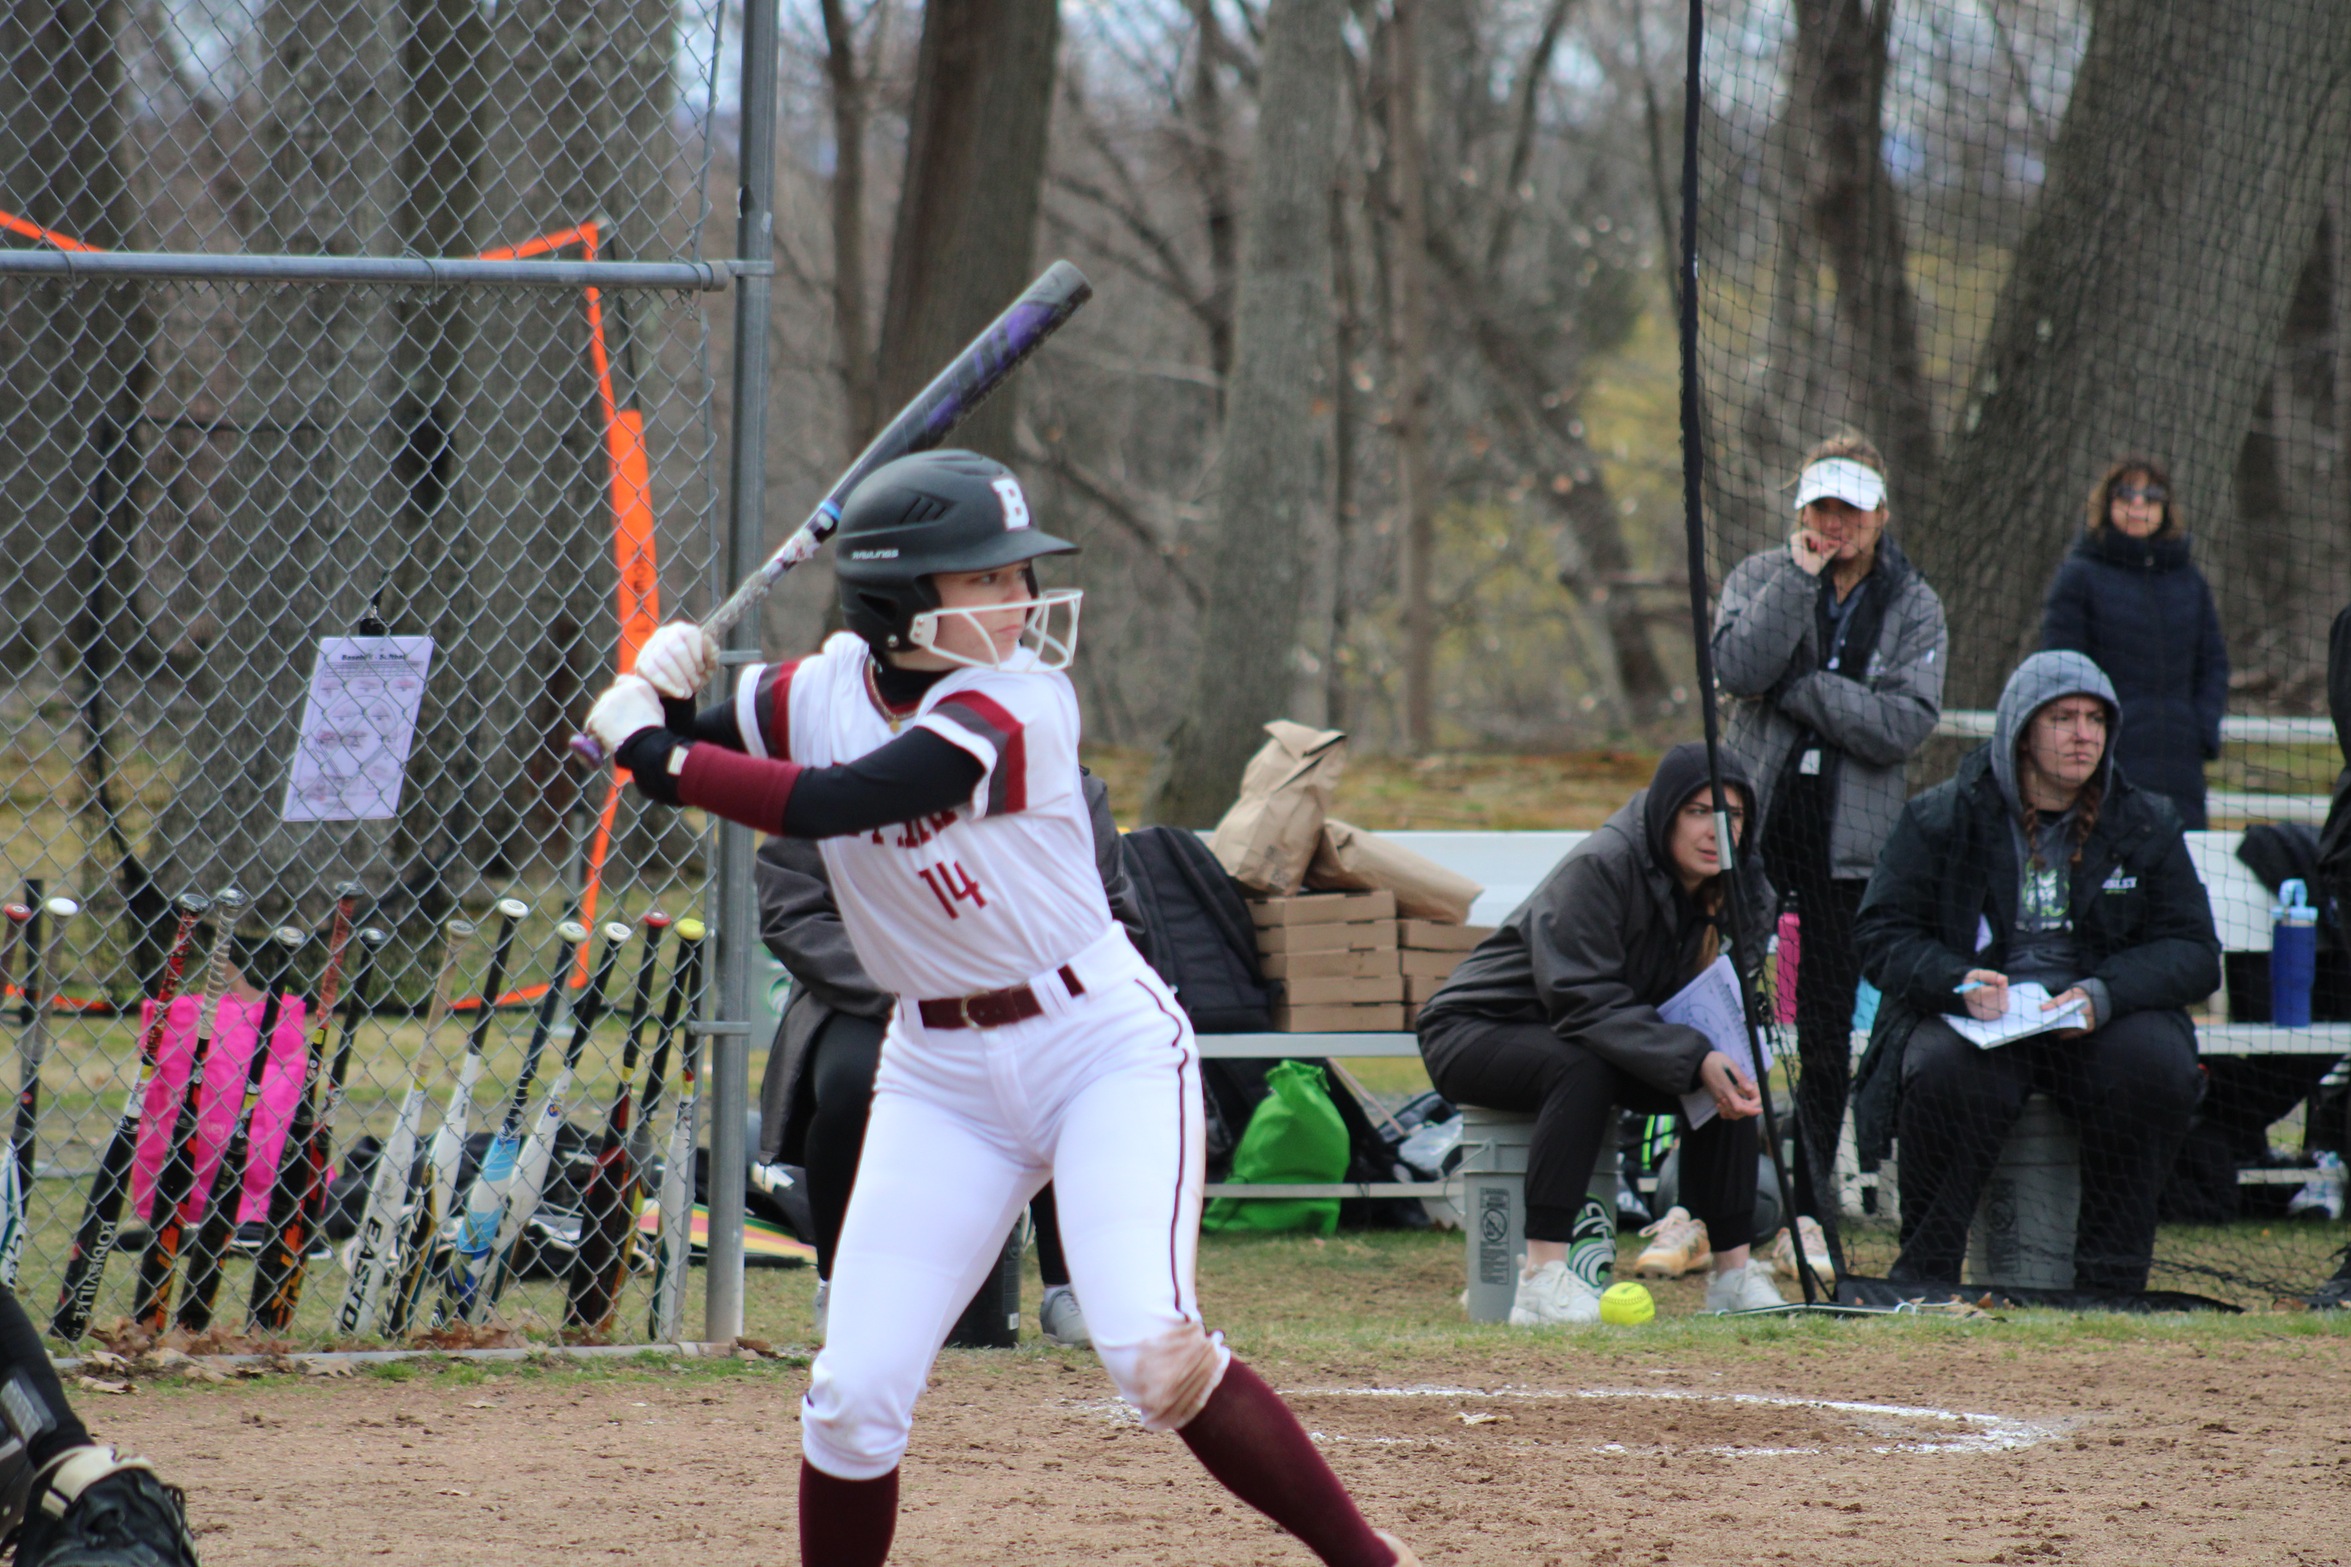 Wildcats Splits pair of Games with Southern Maine CC